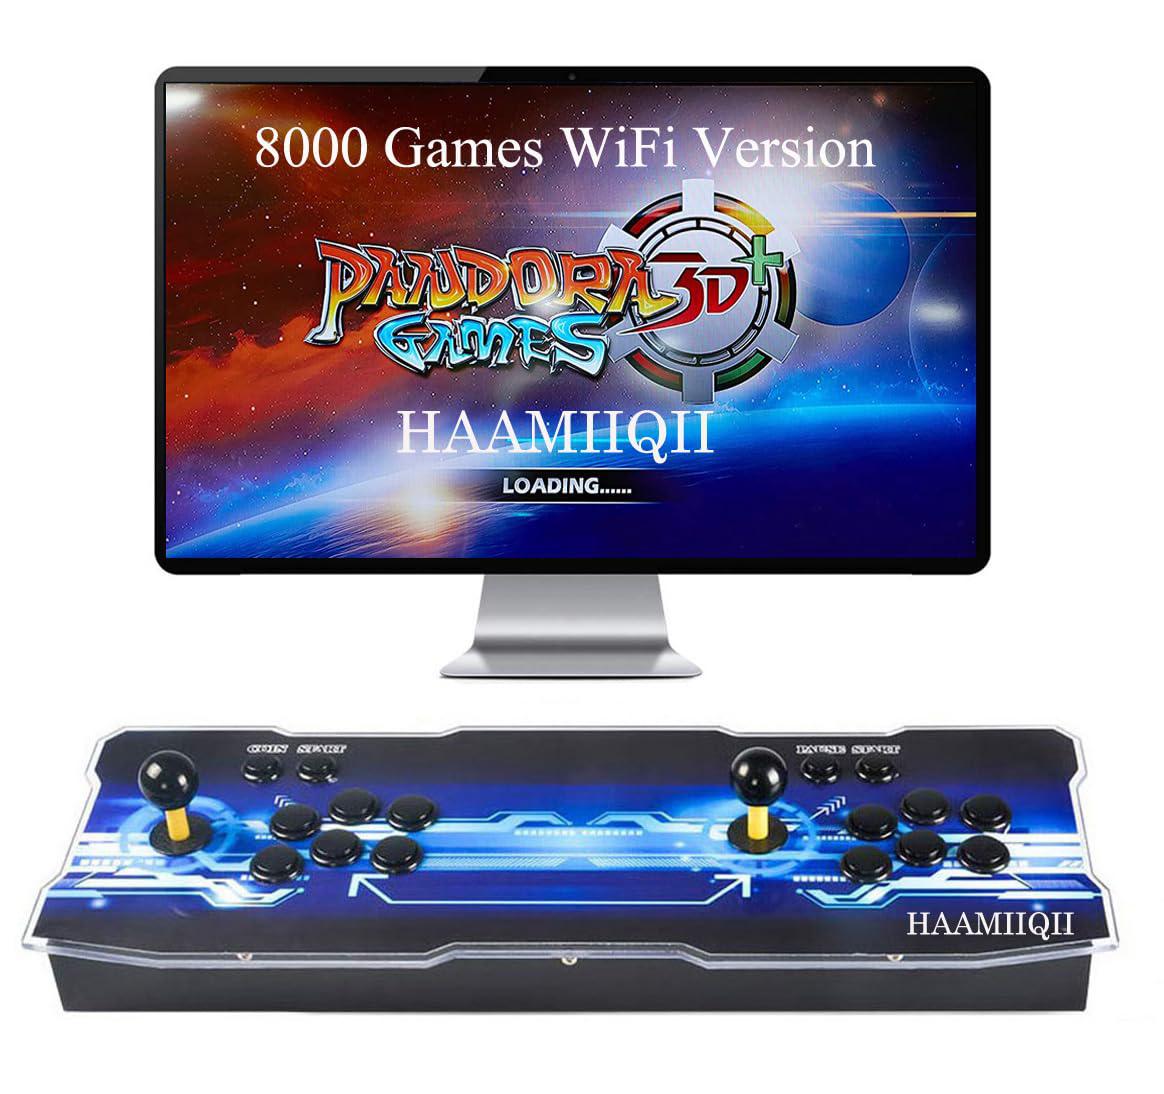 haamiiqii 3d+ pandora games arcade game console - 8000 games installed, wi-fi version, add more games, support 3d games, sear